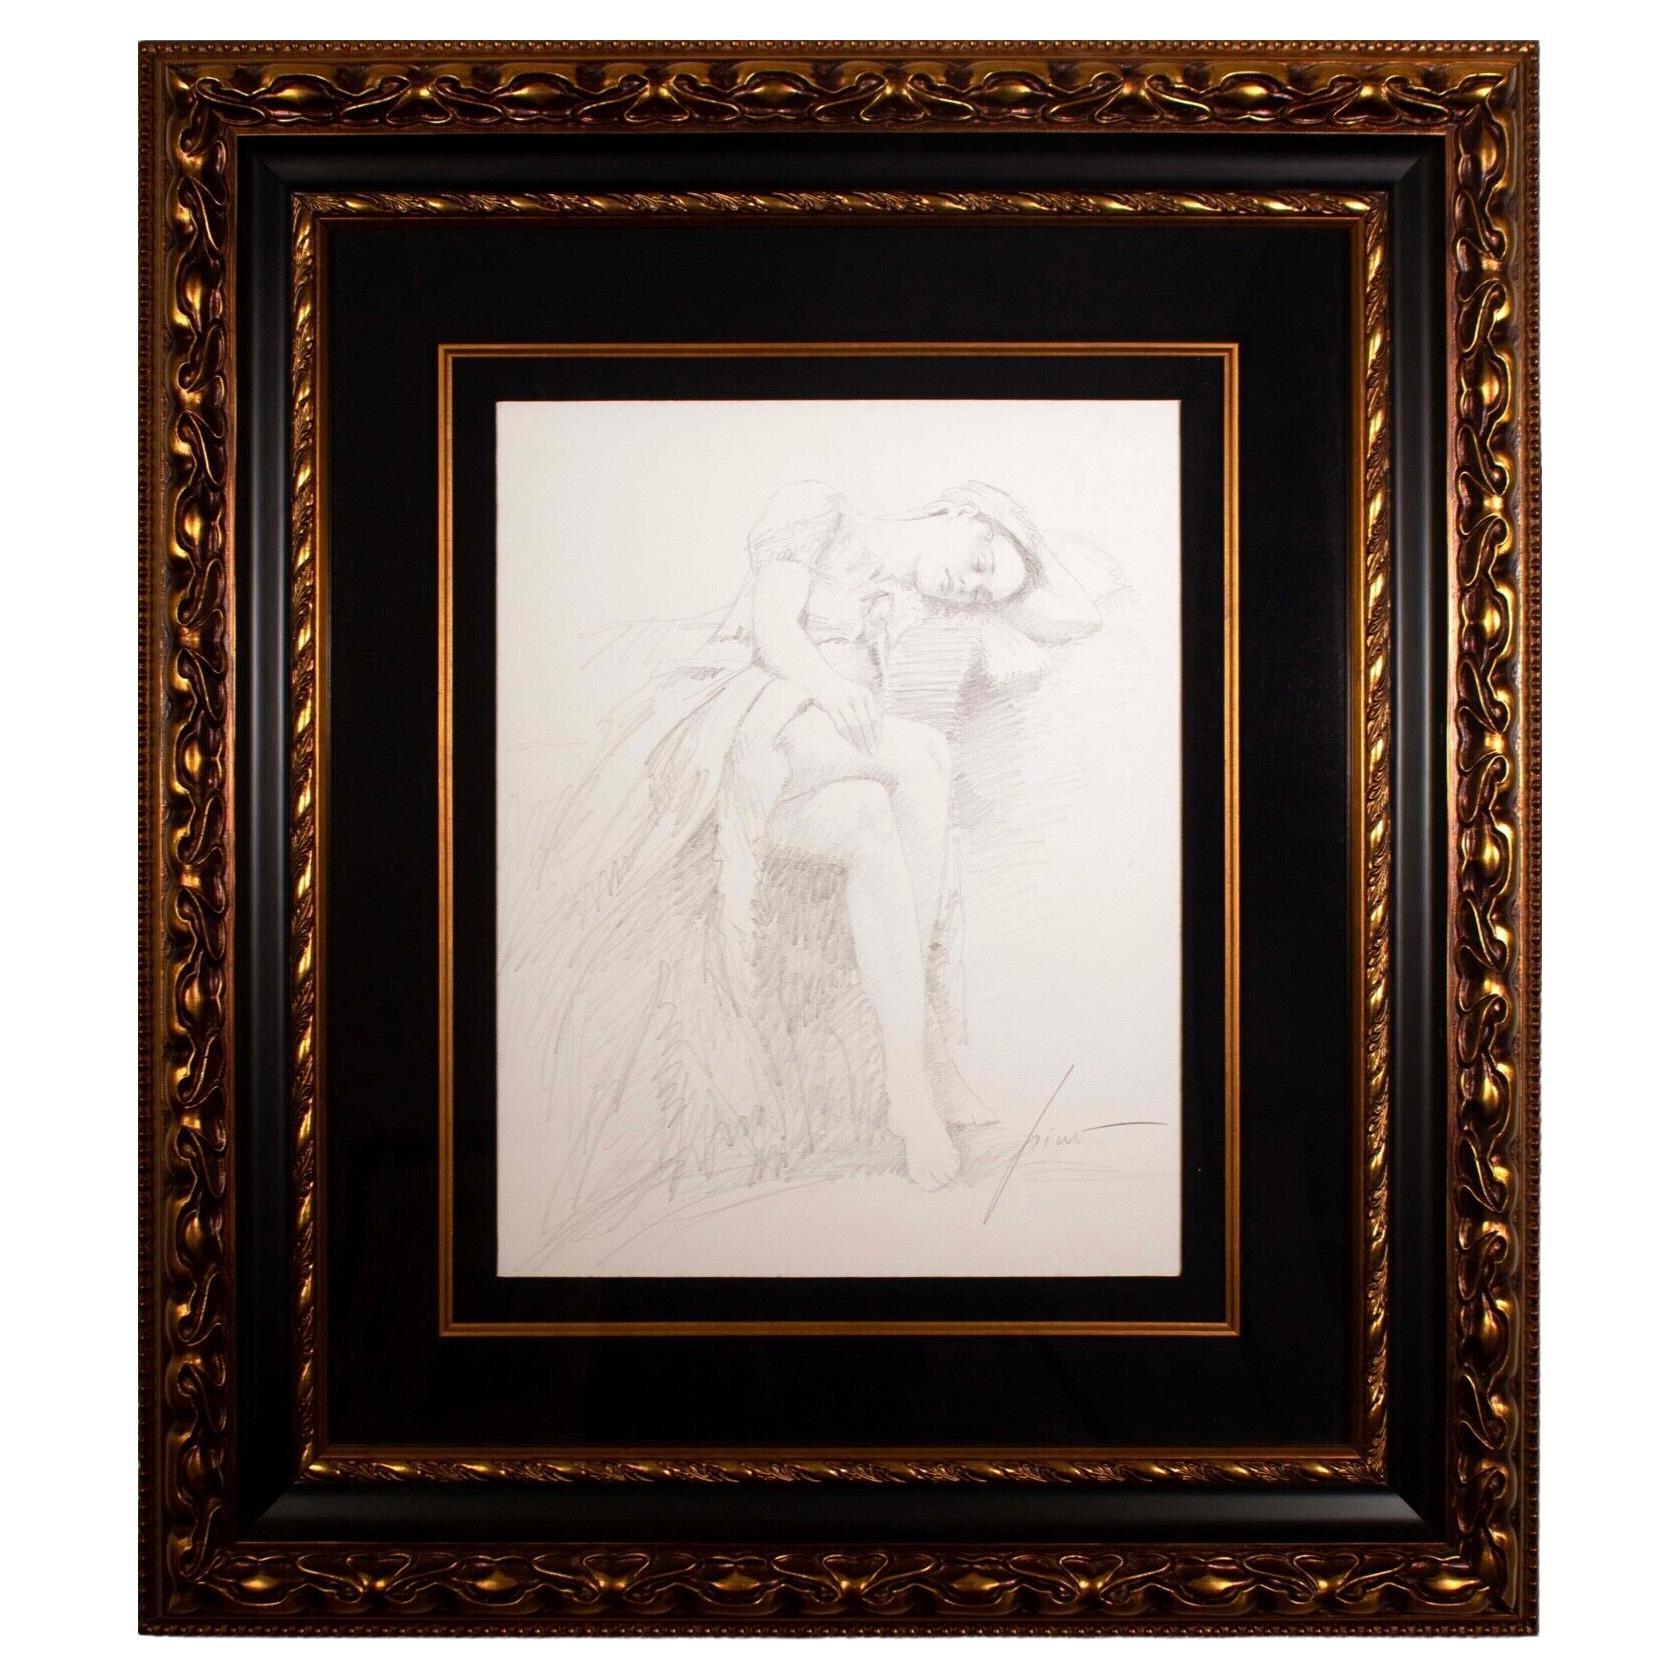 Pino Signed Original Graphite Drawing on Paper Untitled #246 Framed 2009 W/ Coa